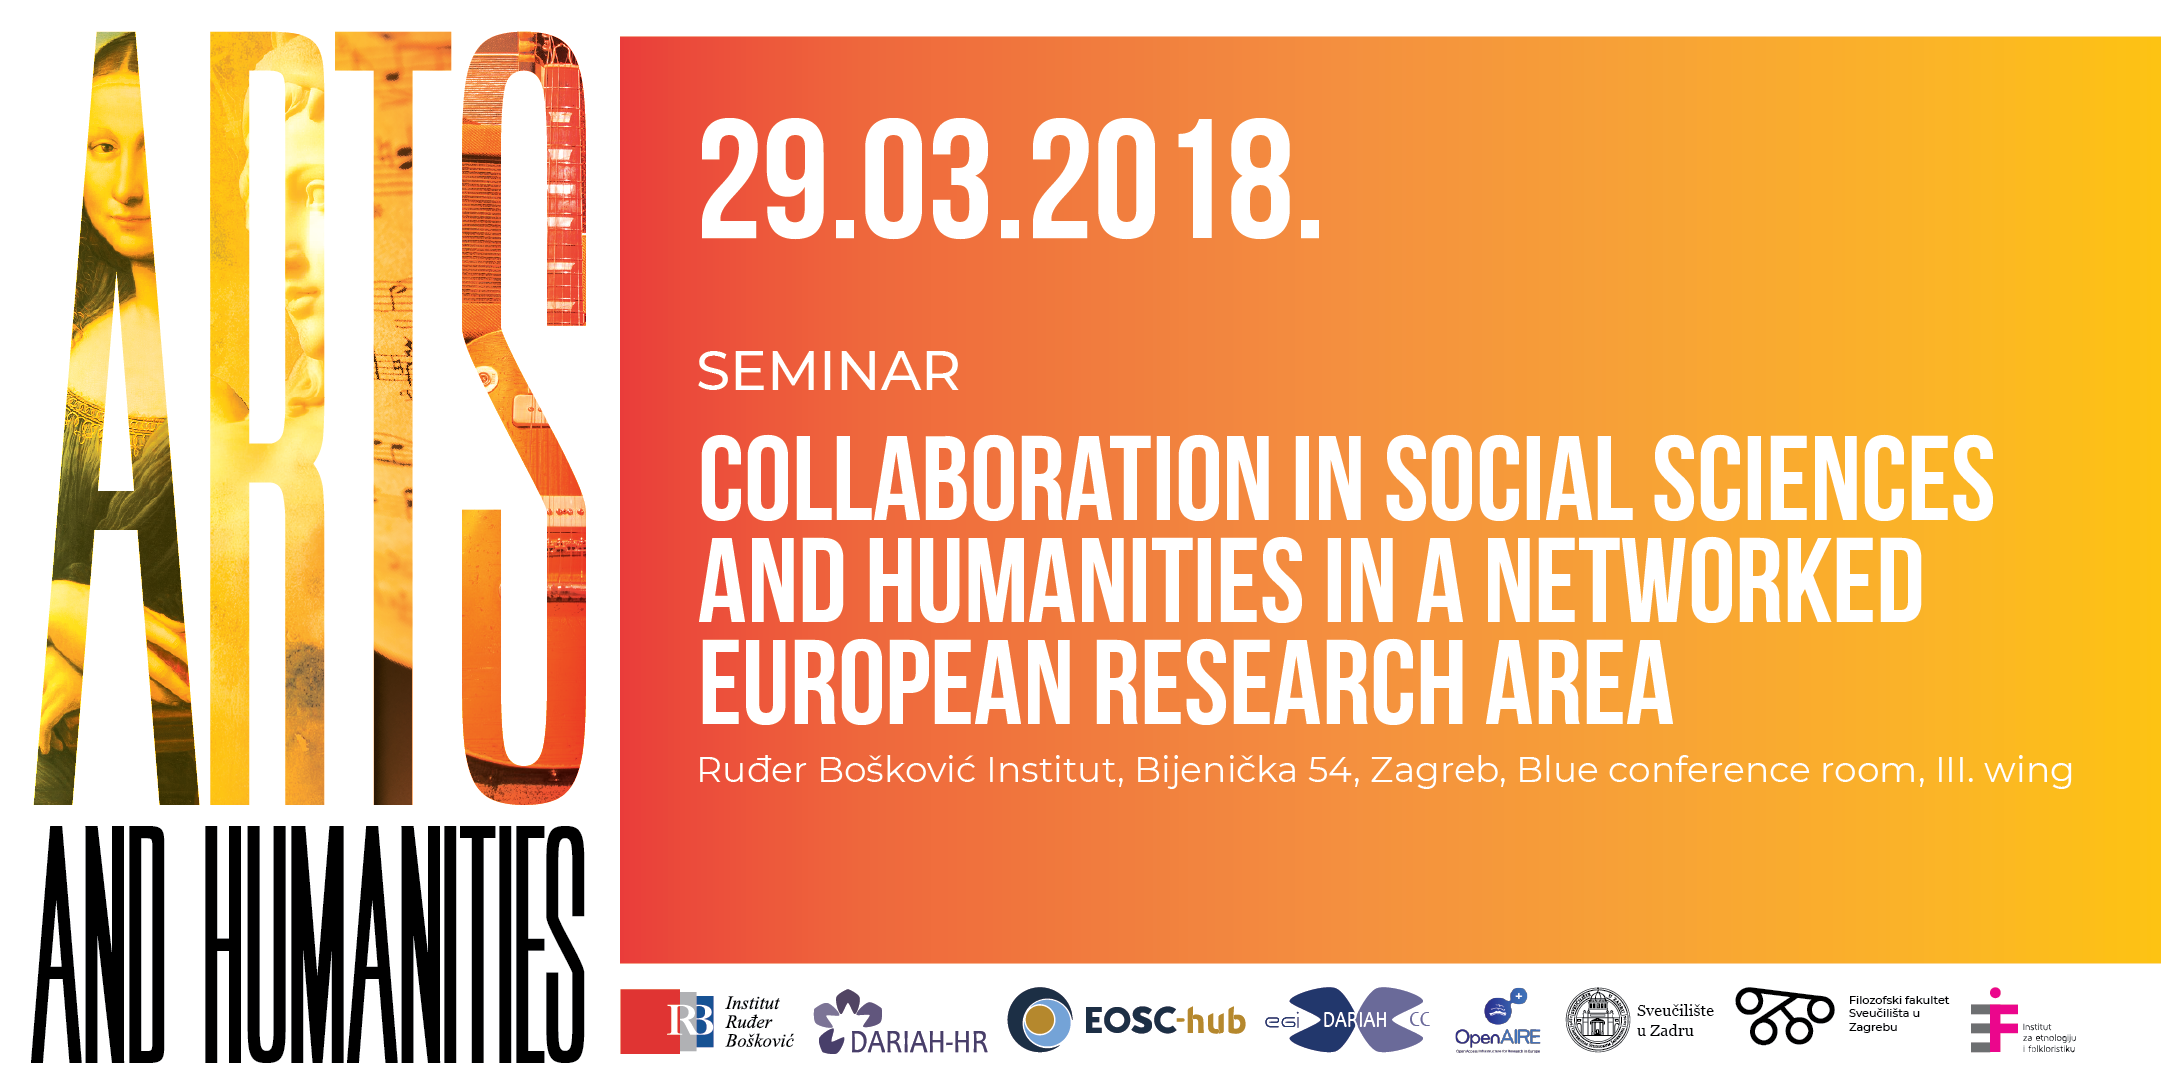 Collaboration in social sciences and humanities in a networked European research area